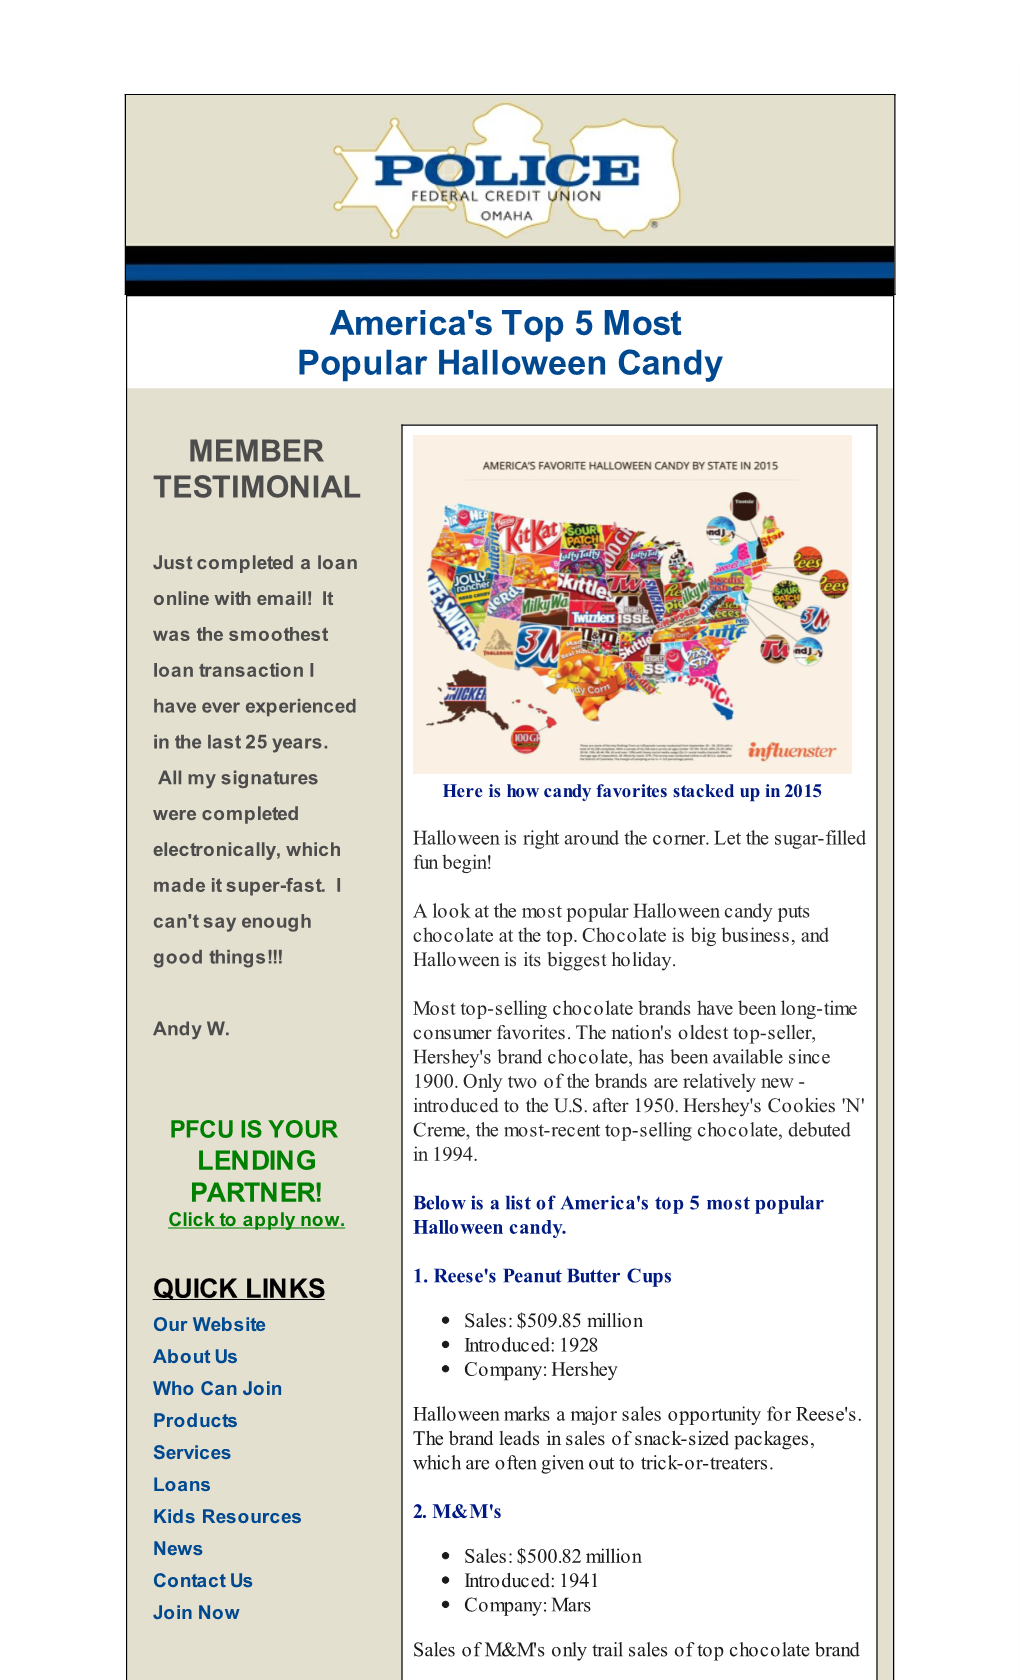 America's Top 5 Most Popular Halloween Candy